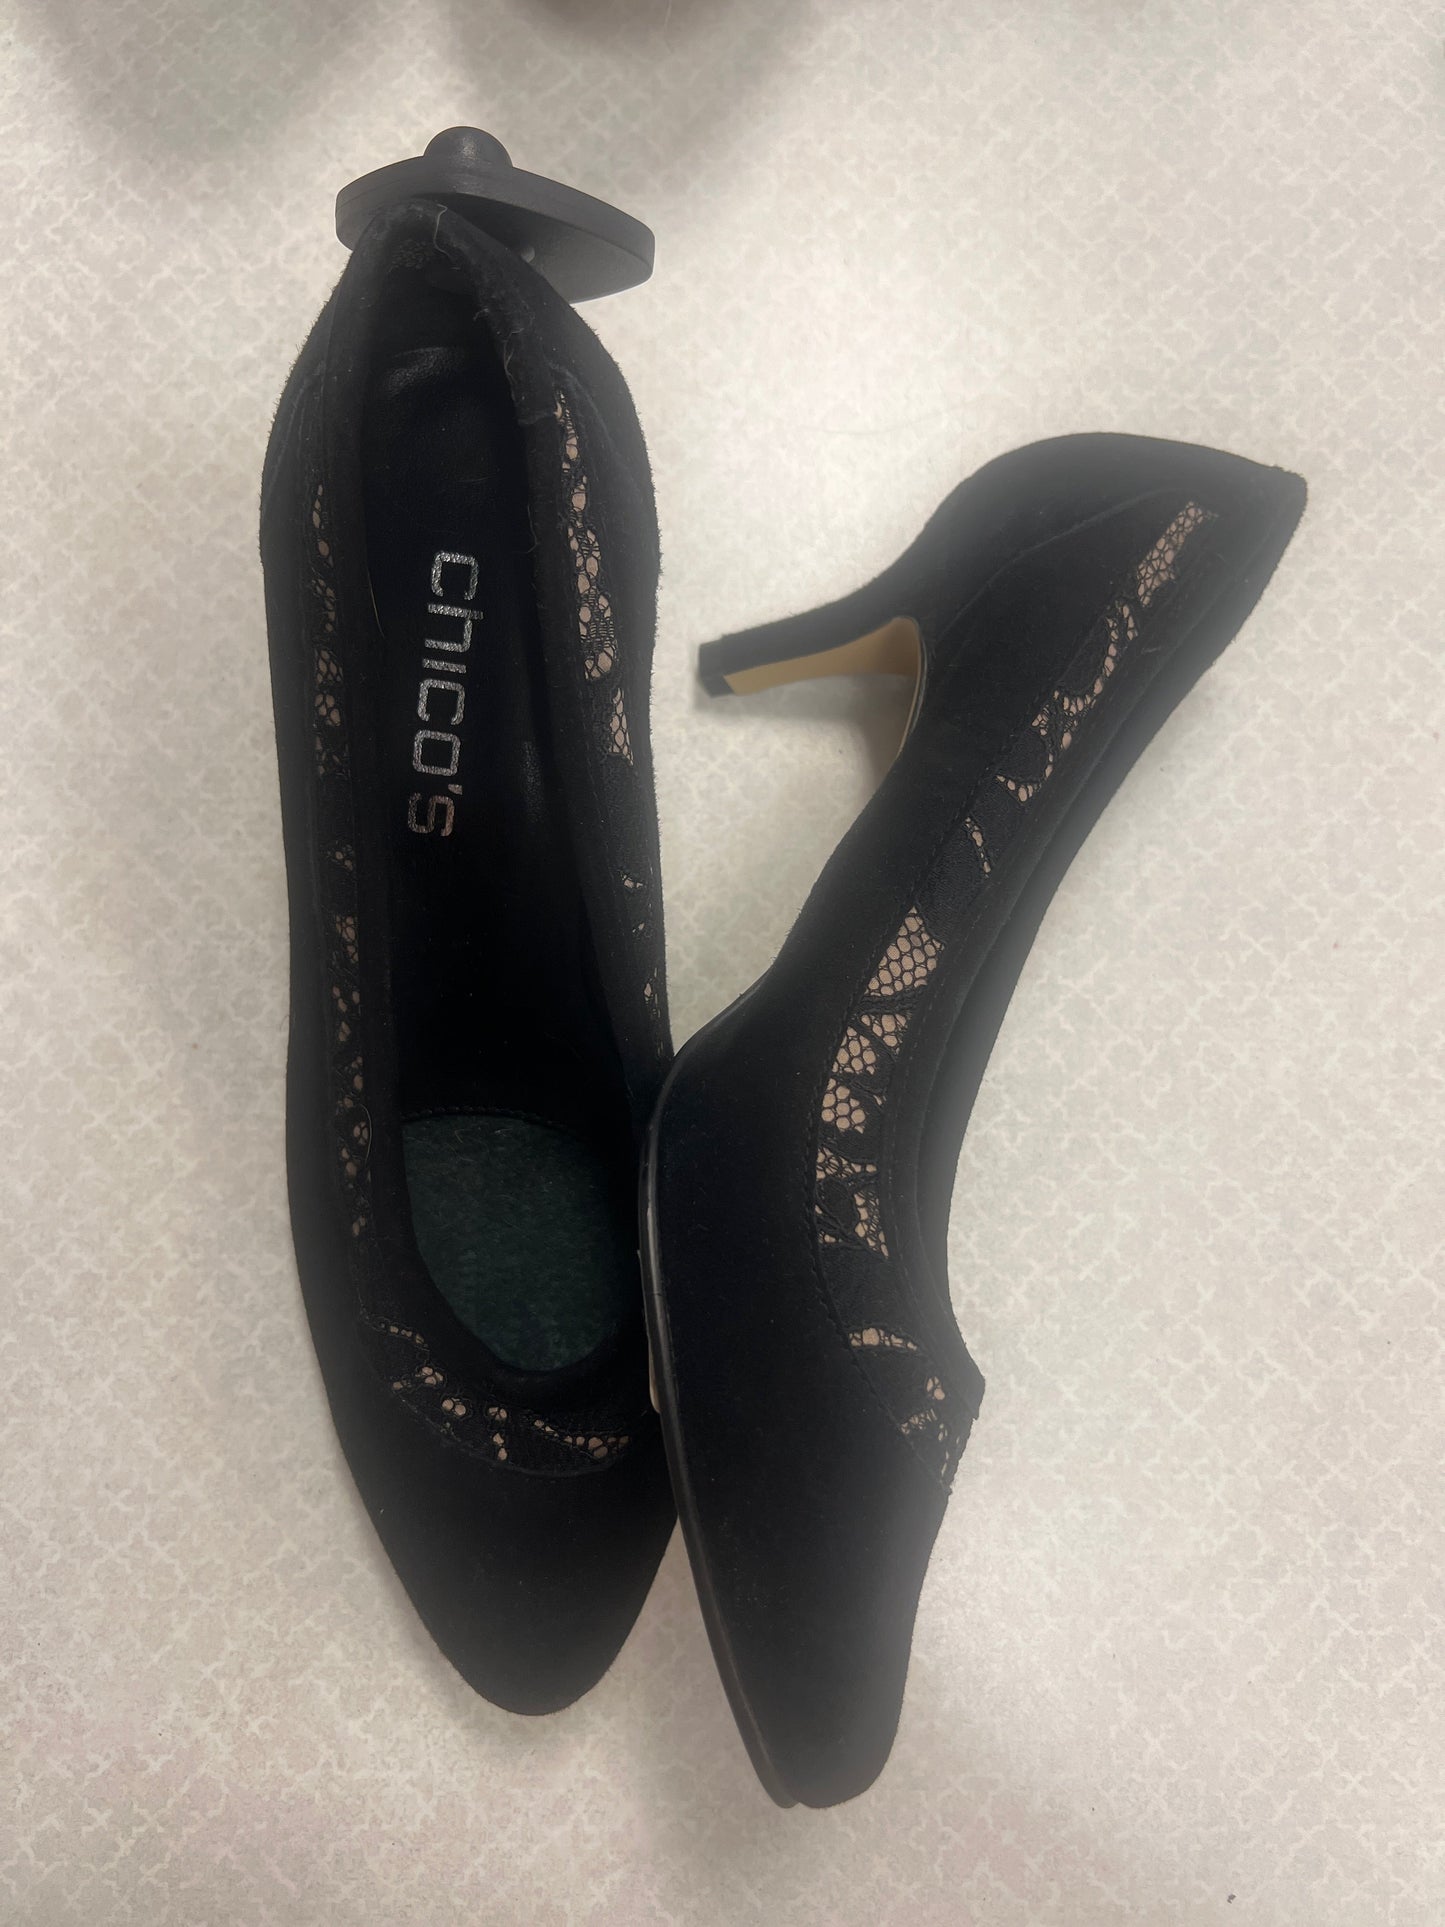 Shoes Heels Stiletto By Chicos  Size: 7.5